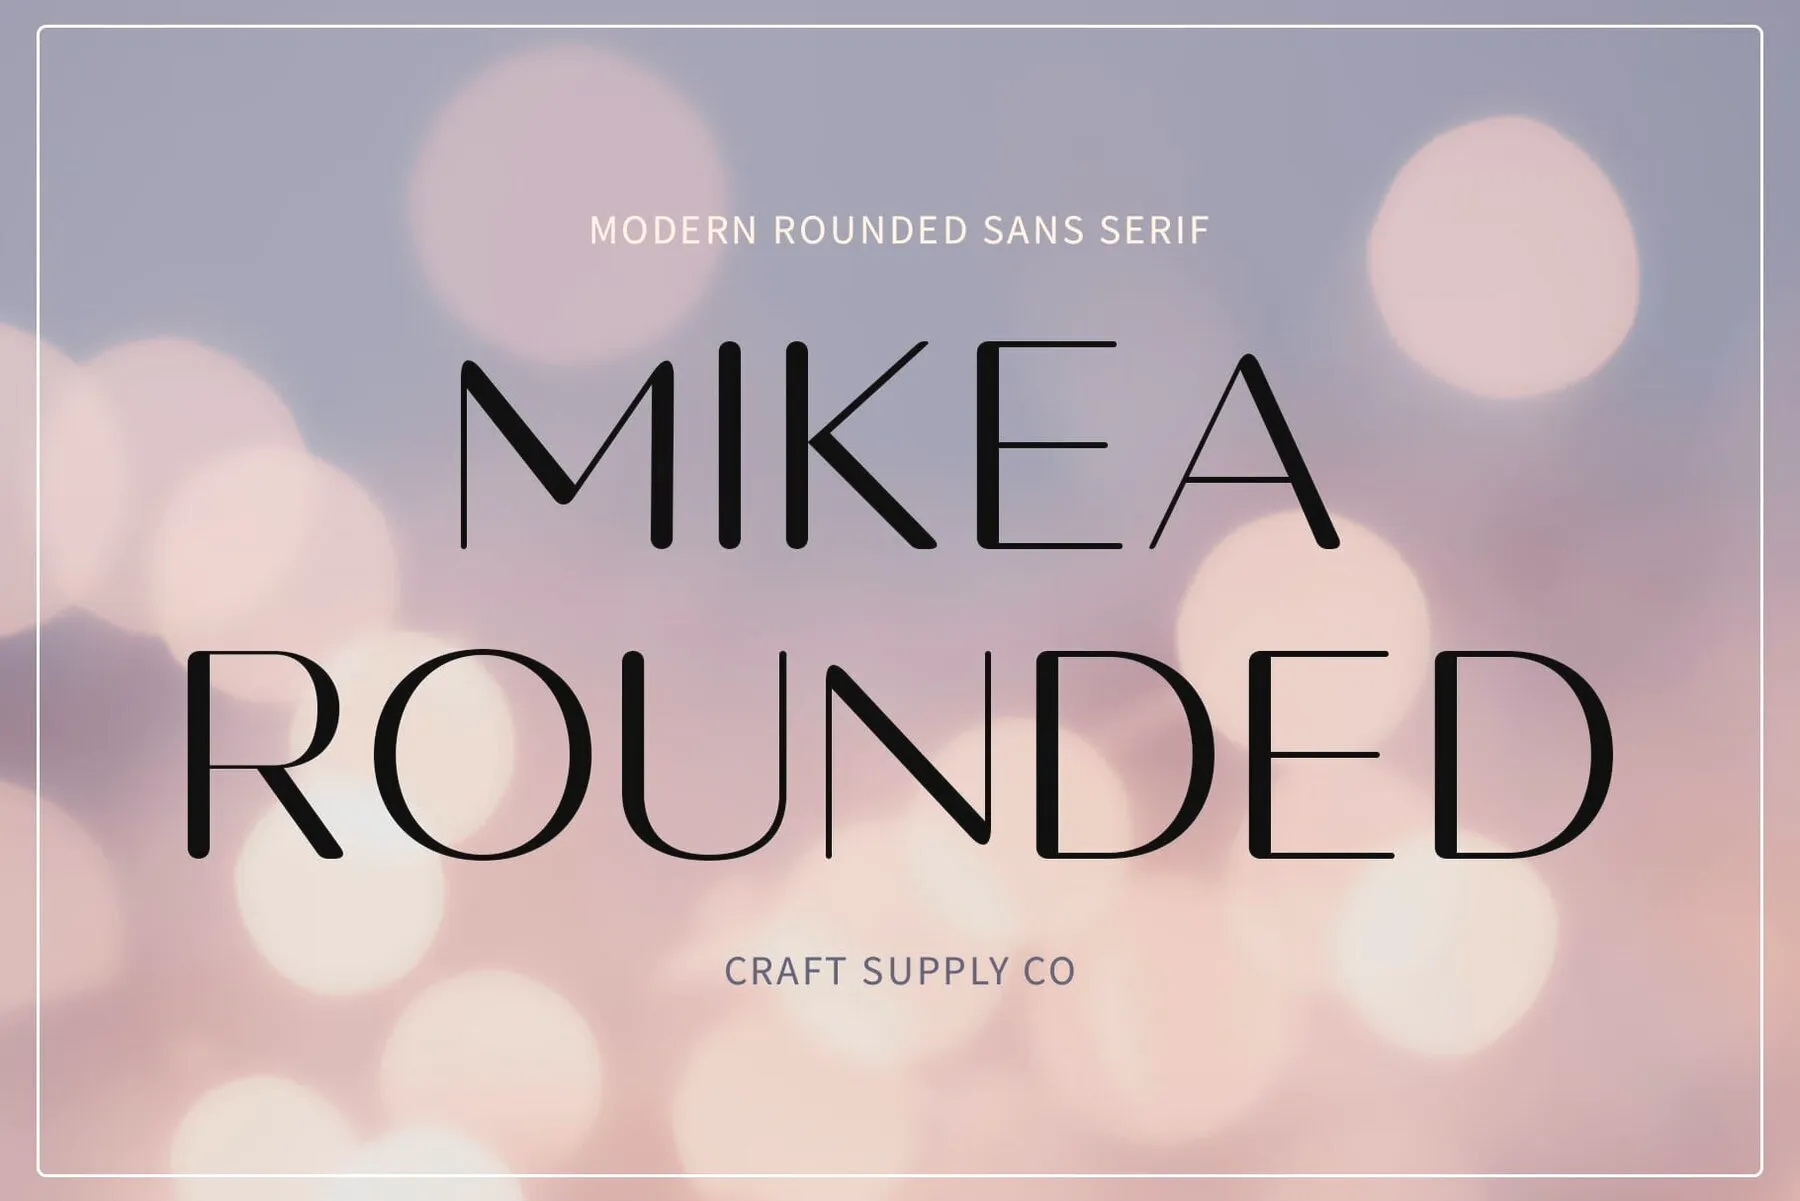 Mikea Rounded